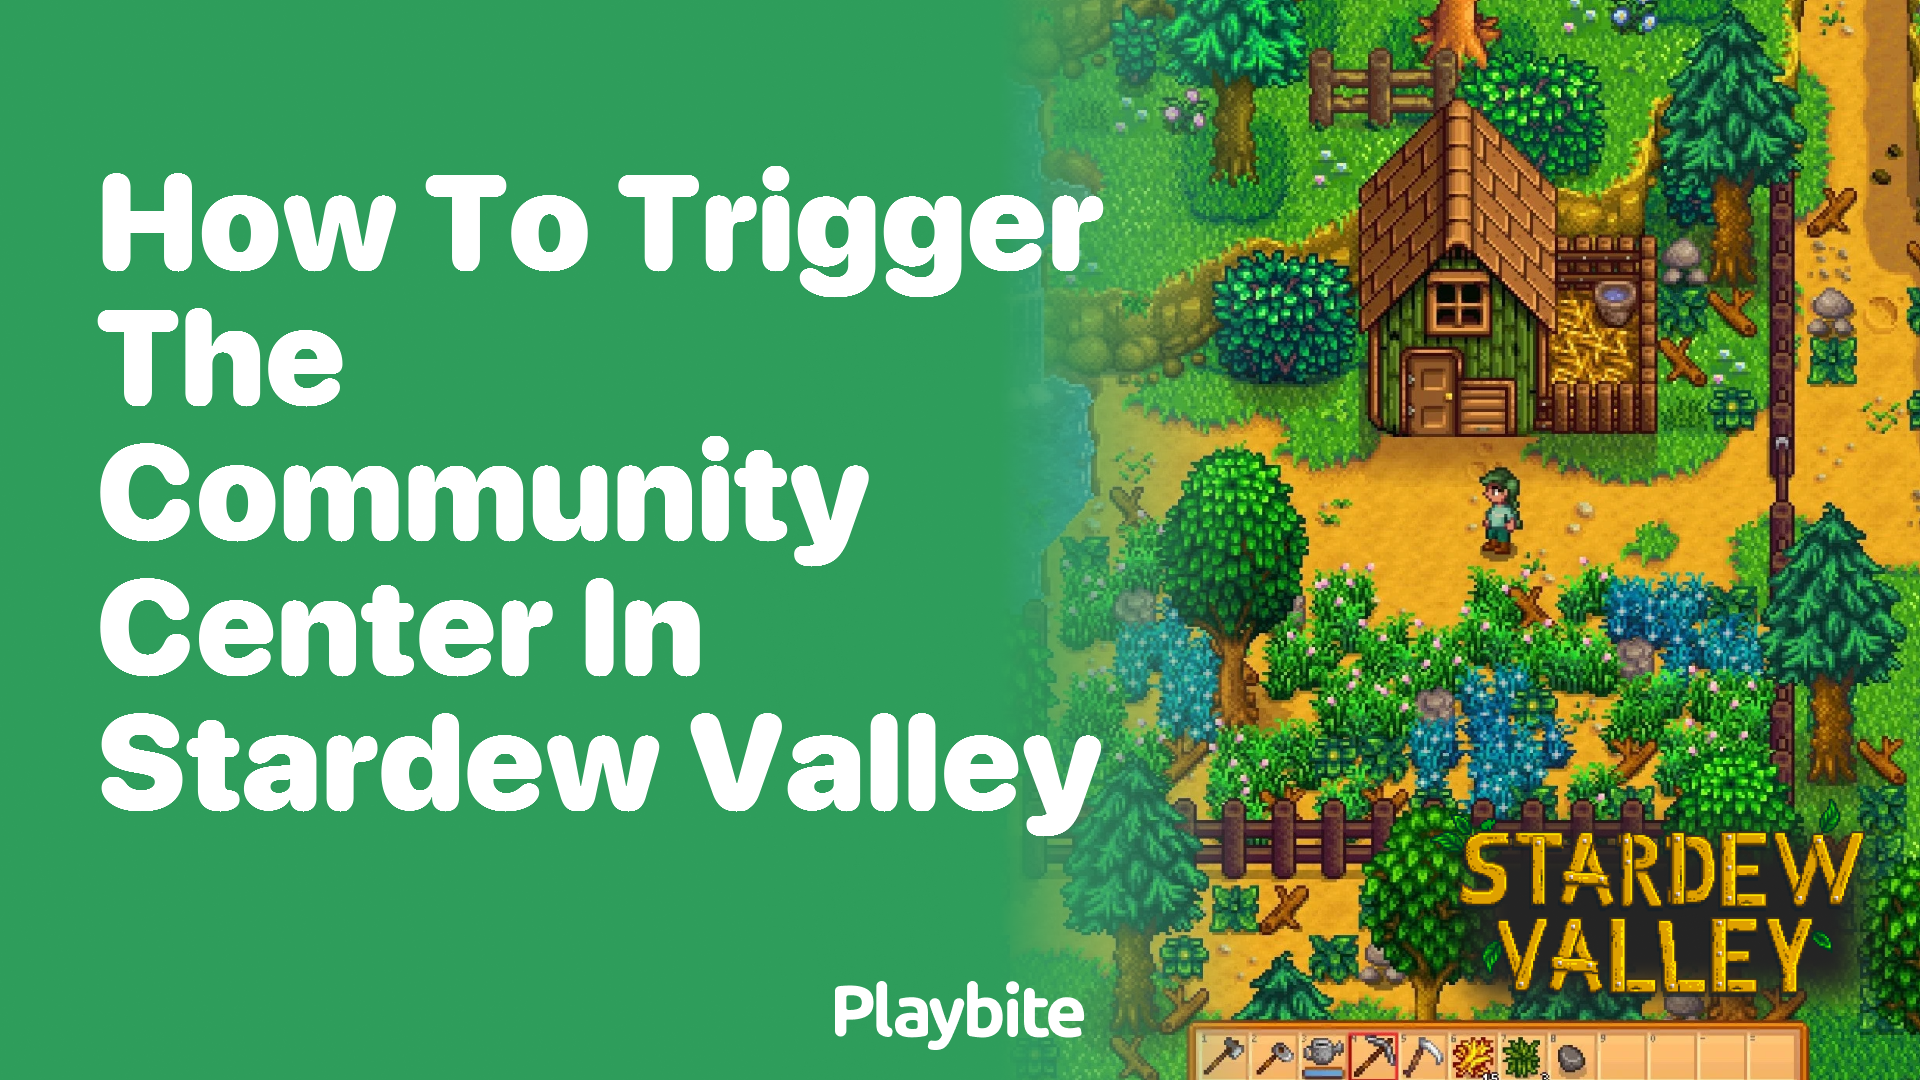 How to Trigger the Community Center in Stardew Valley